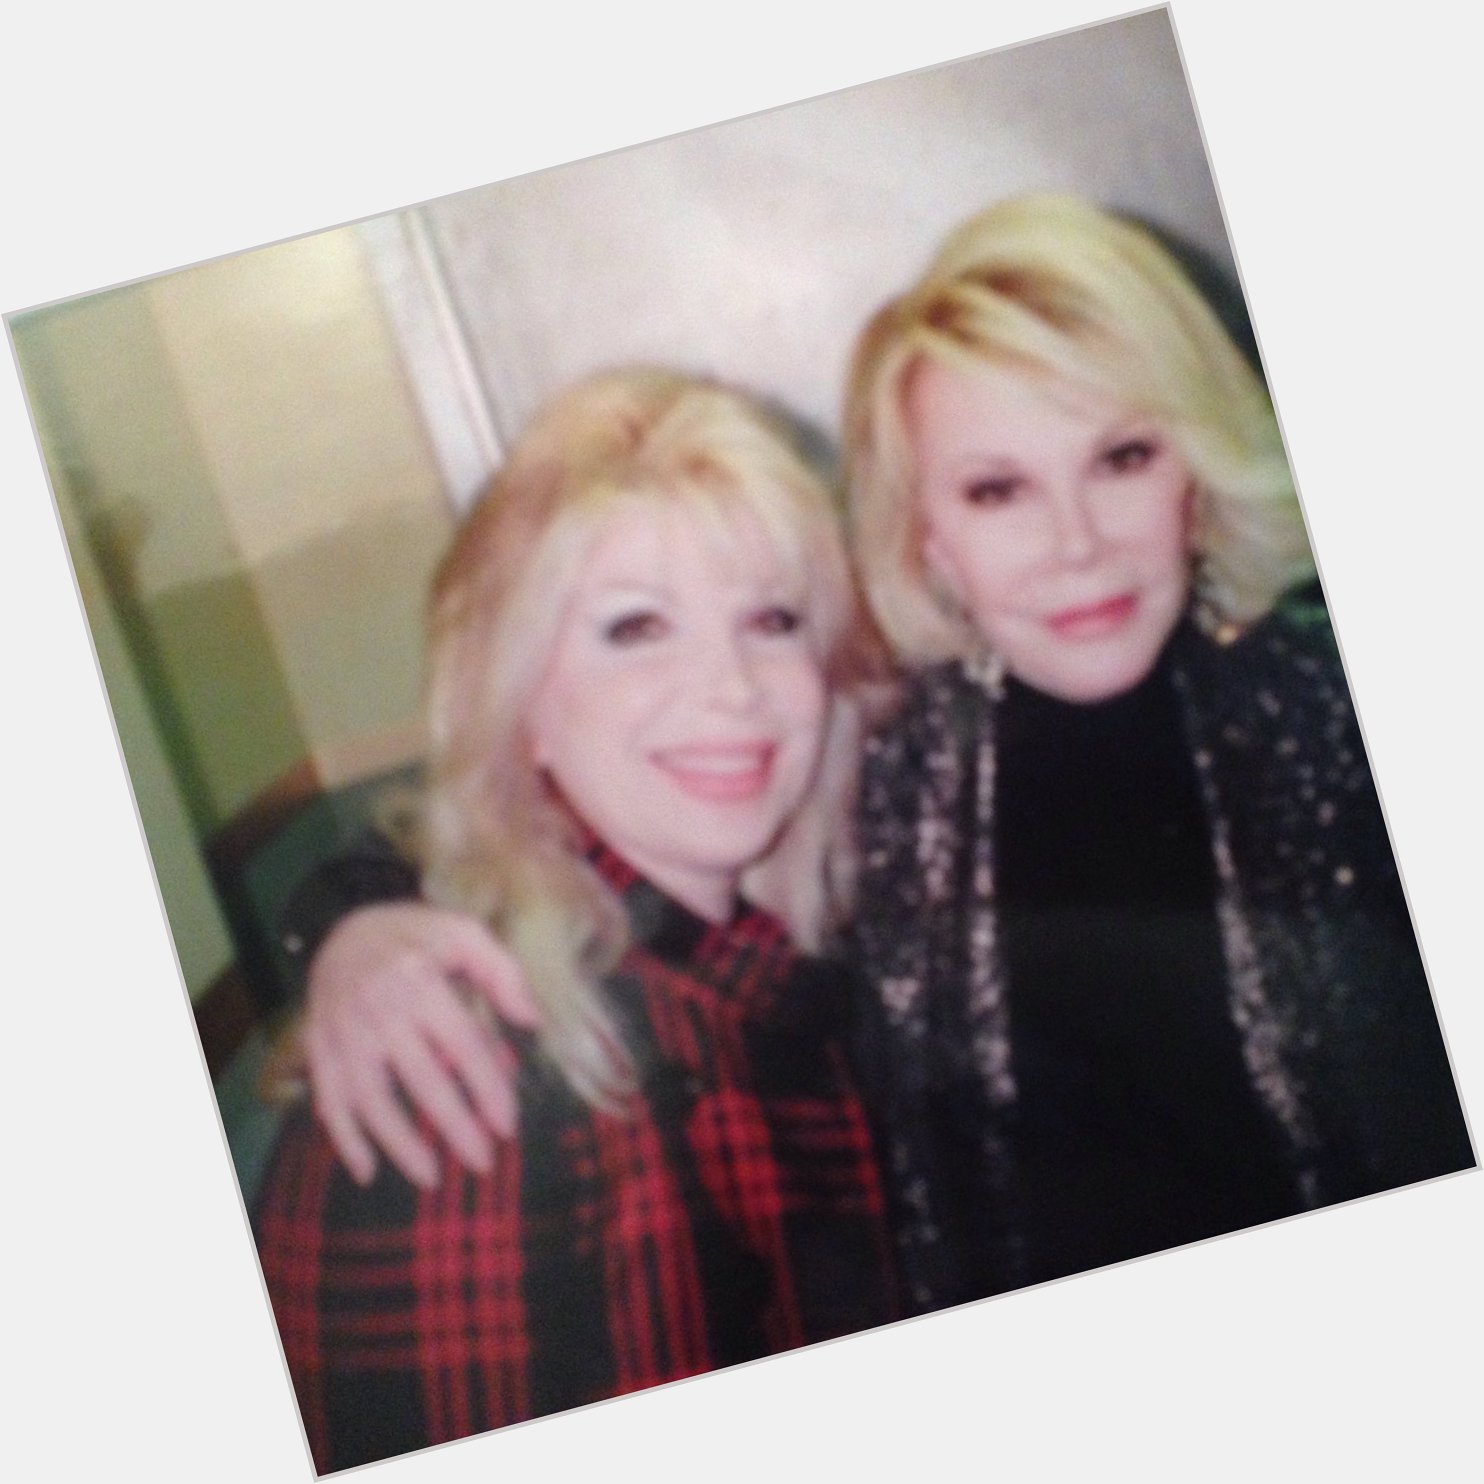 Happy birthday to my much missed and beloved icon Joan Rivers. Truly a comedic genius. Love you! 